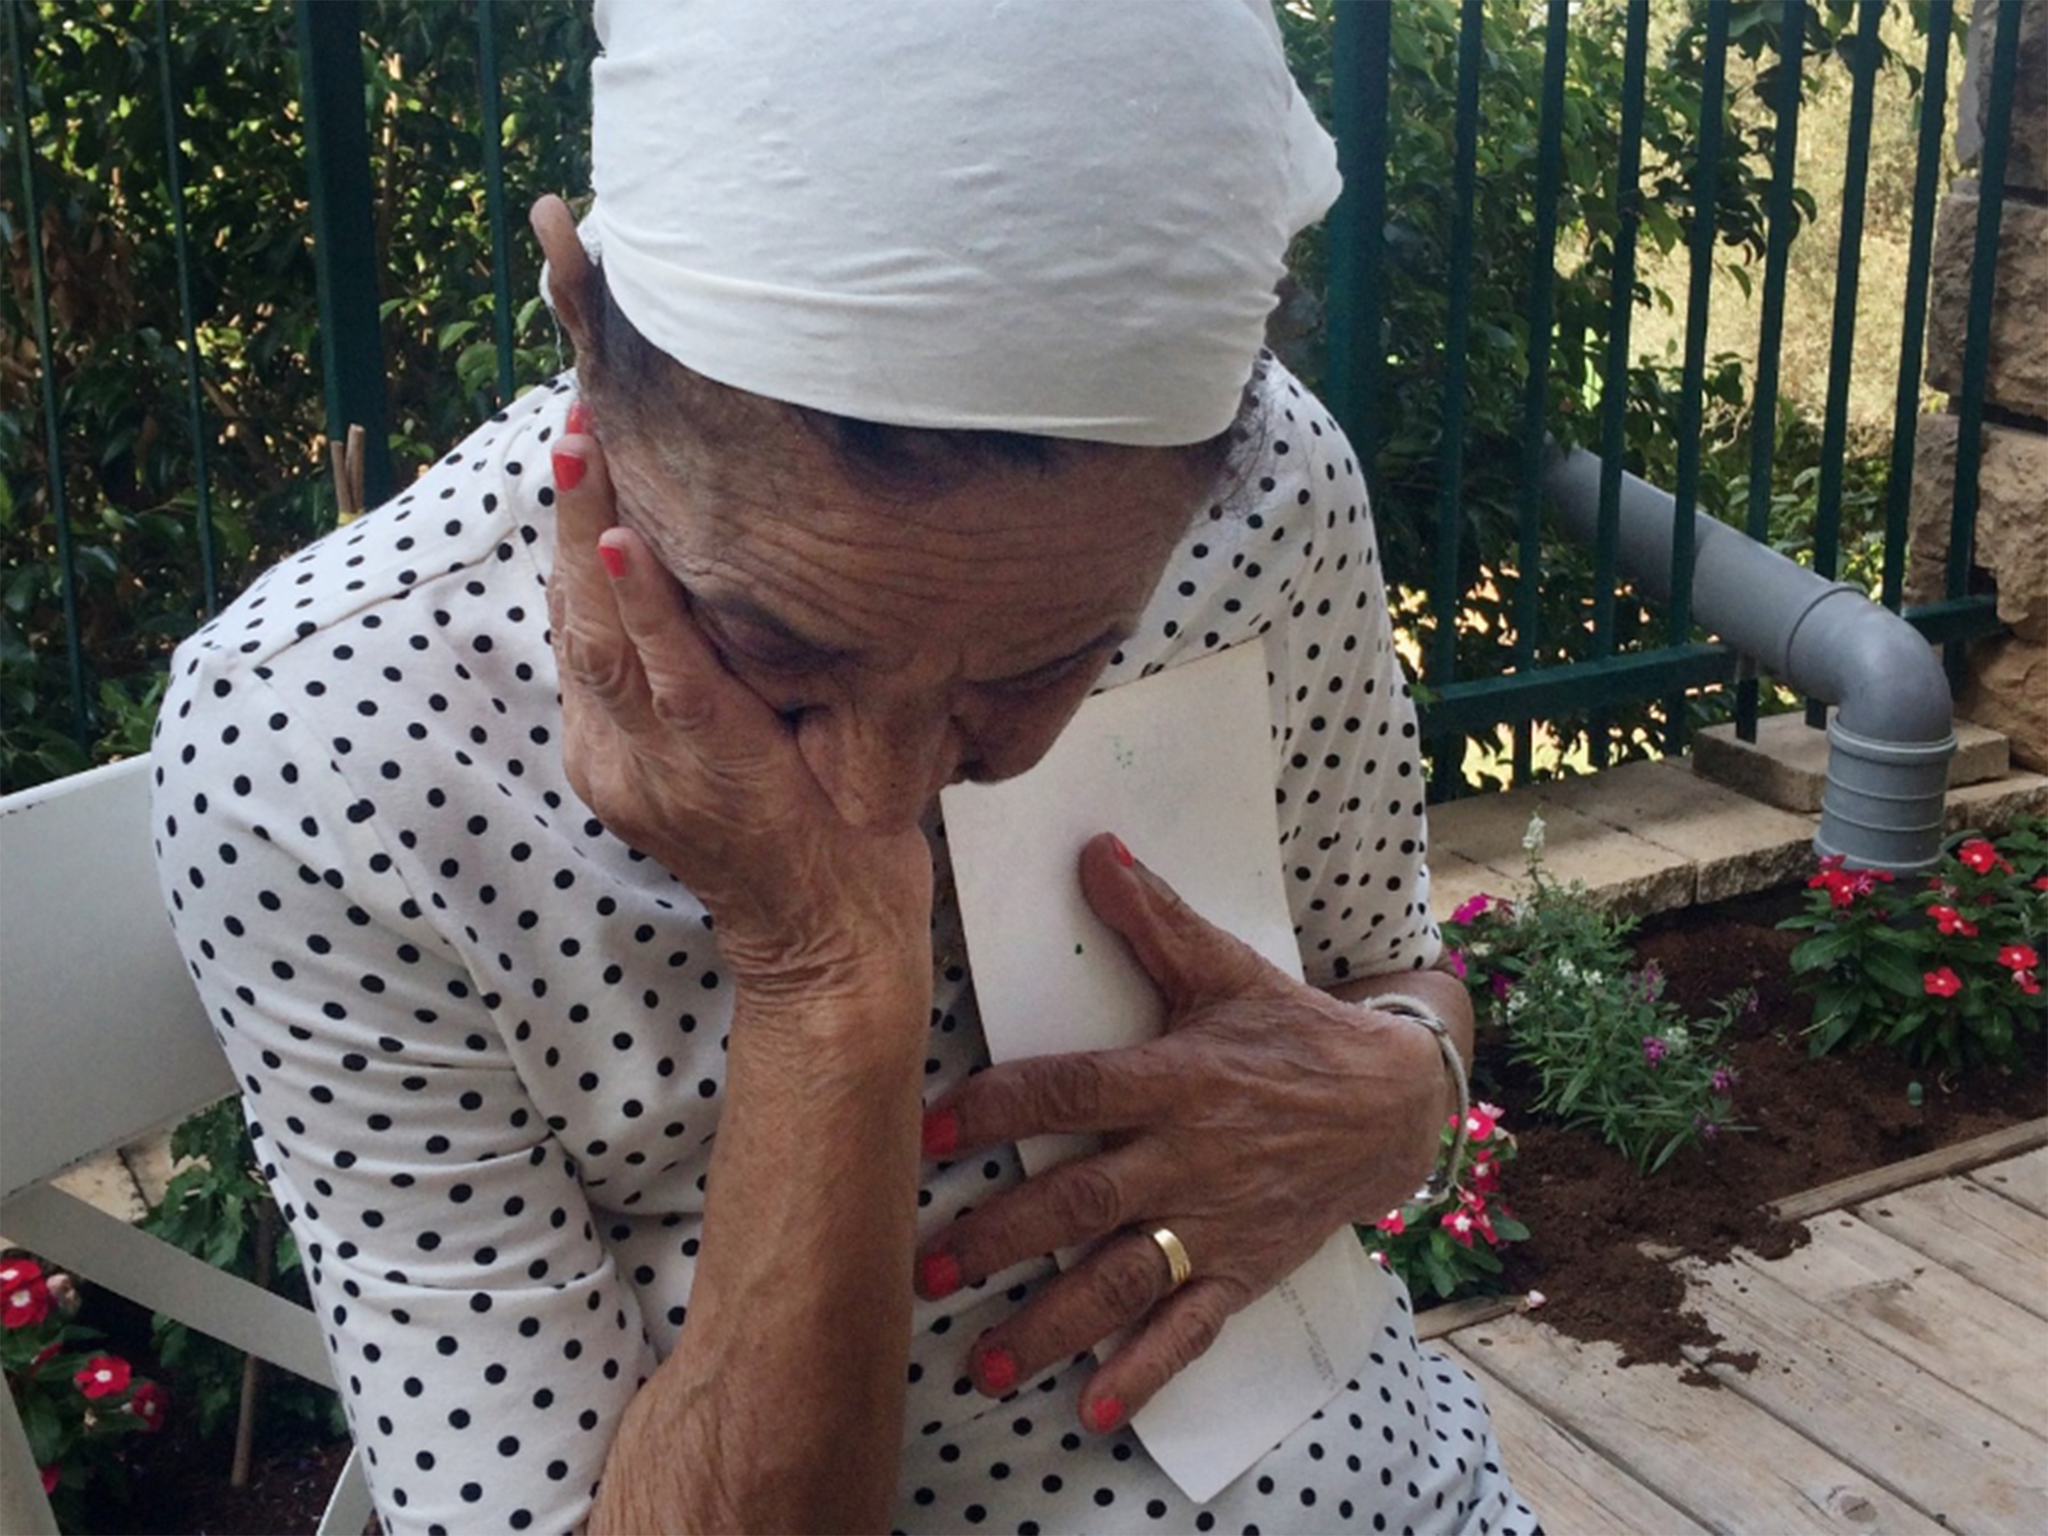 Yona Yosef, 84, never saw her sister again after taking her for a routine check-up